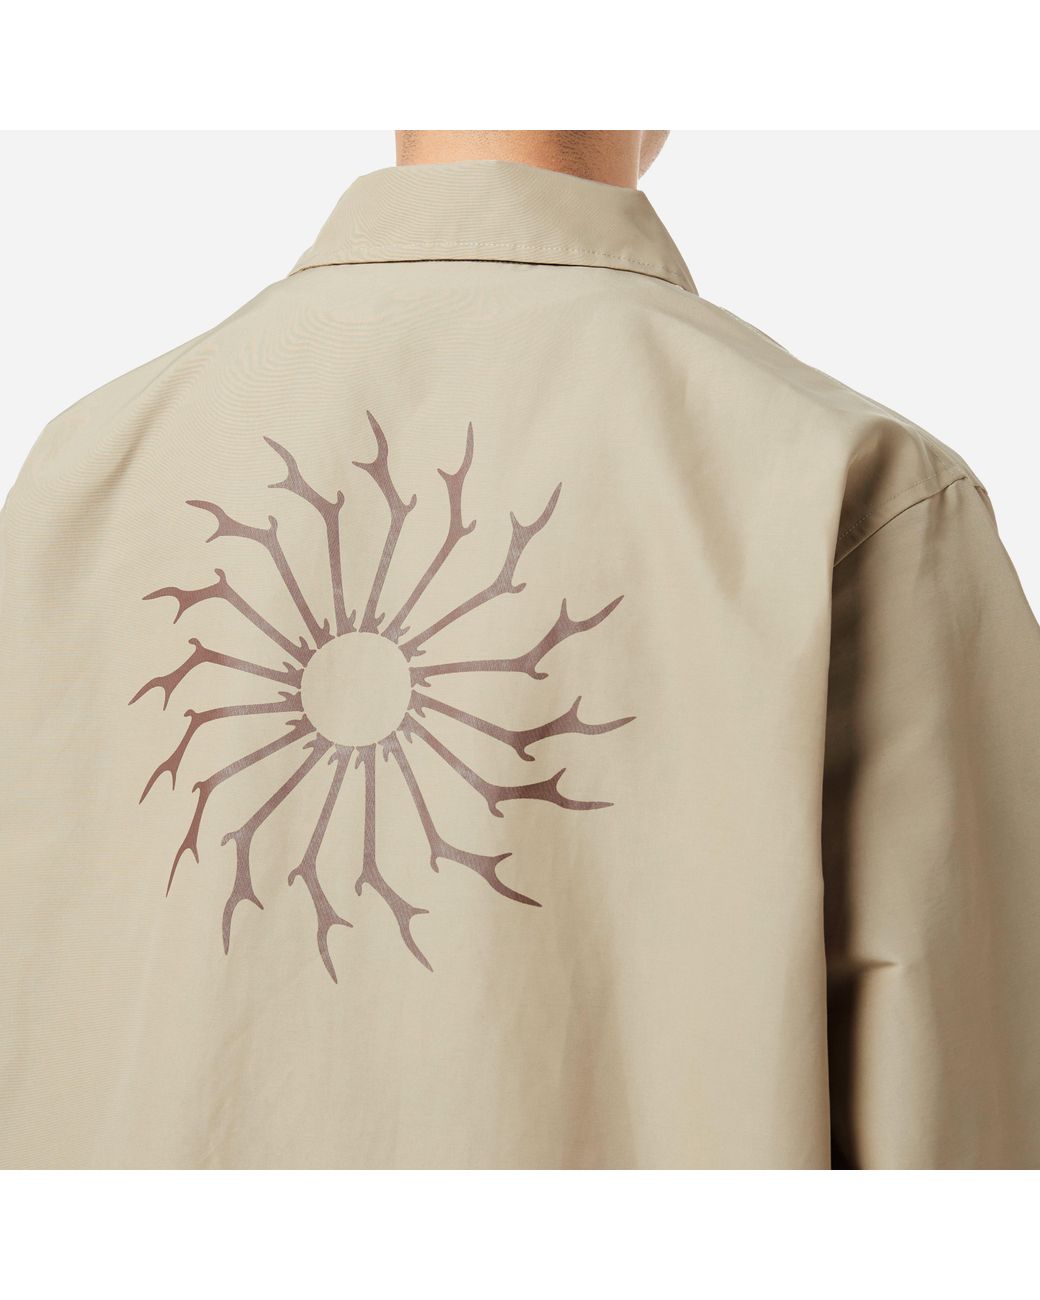 South2 West8 Coach Jacket in Natural for Men | Lyst Canada